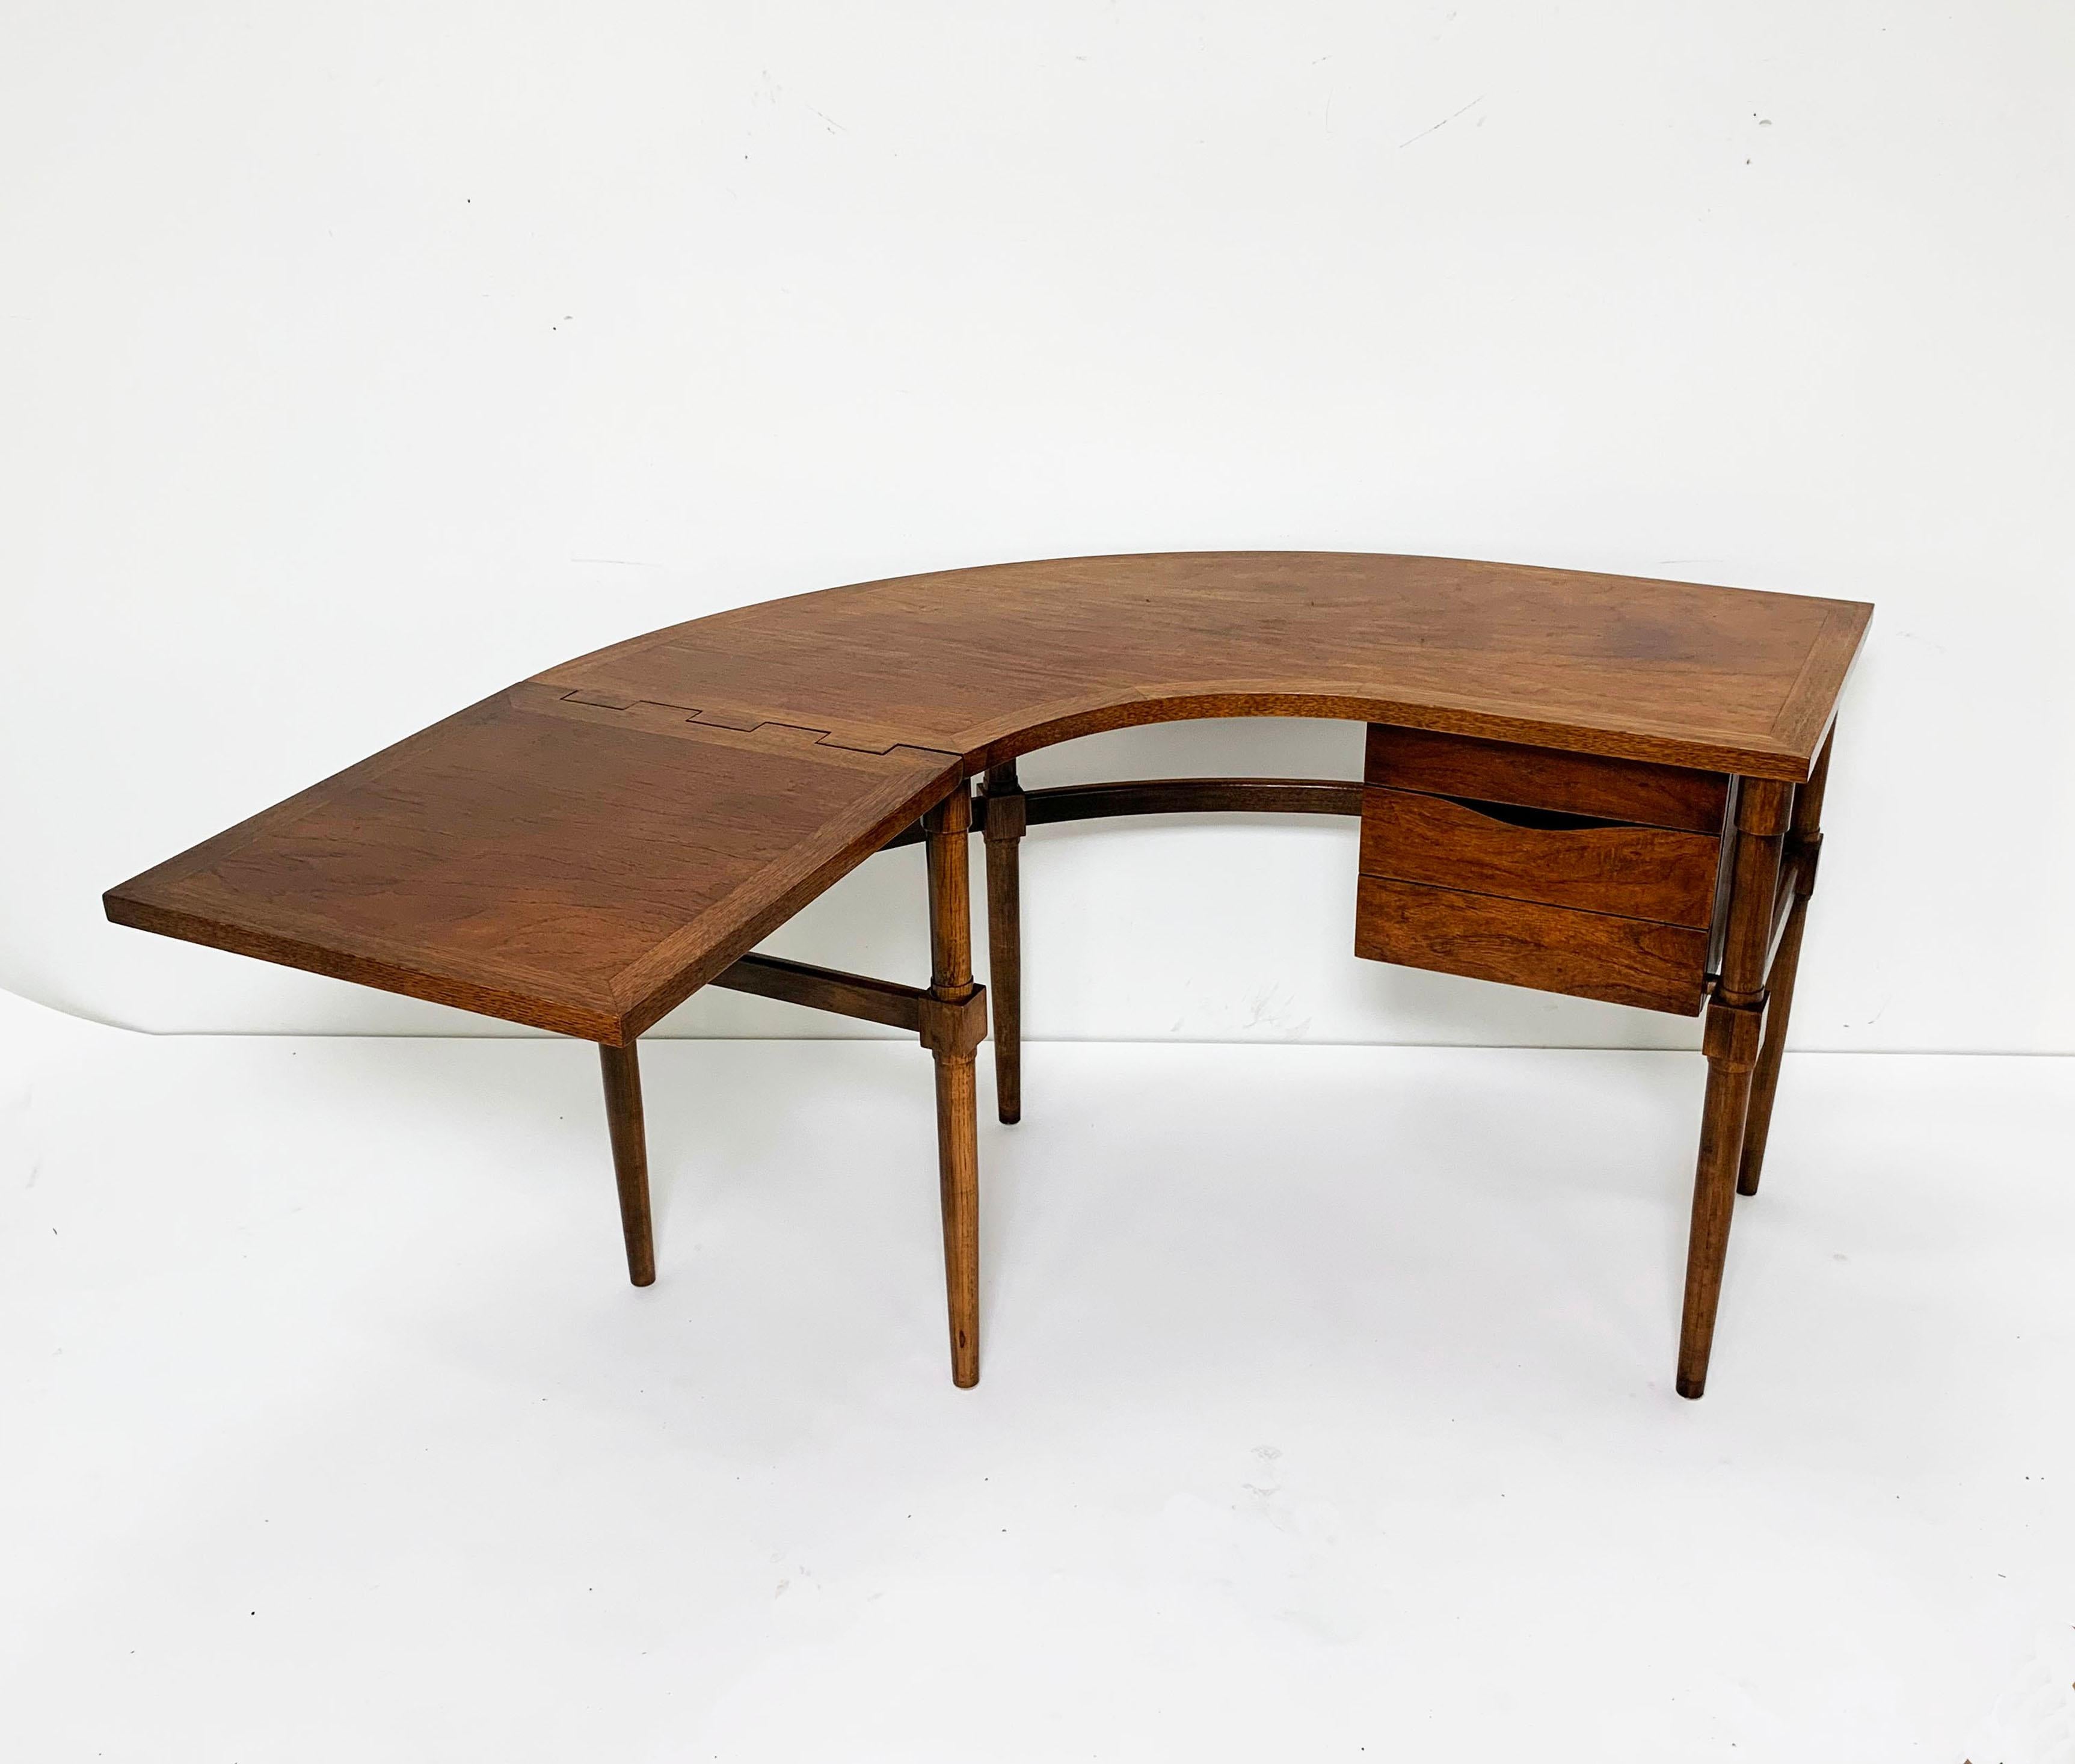 A rare vanity/desk by Harold Schwartz for Romweber, circa early 1950s. After WWII the US faced one of the biggest housing booms in its history as returning GIs used their benefits under the Readjustment Act to purchase new homes. They needed